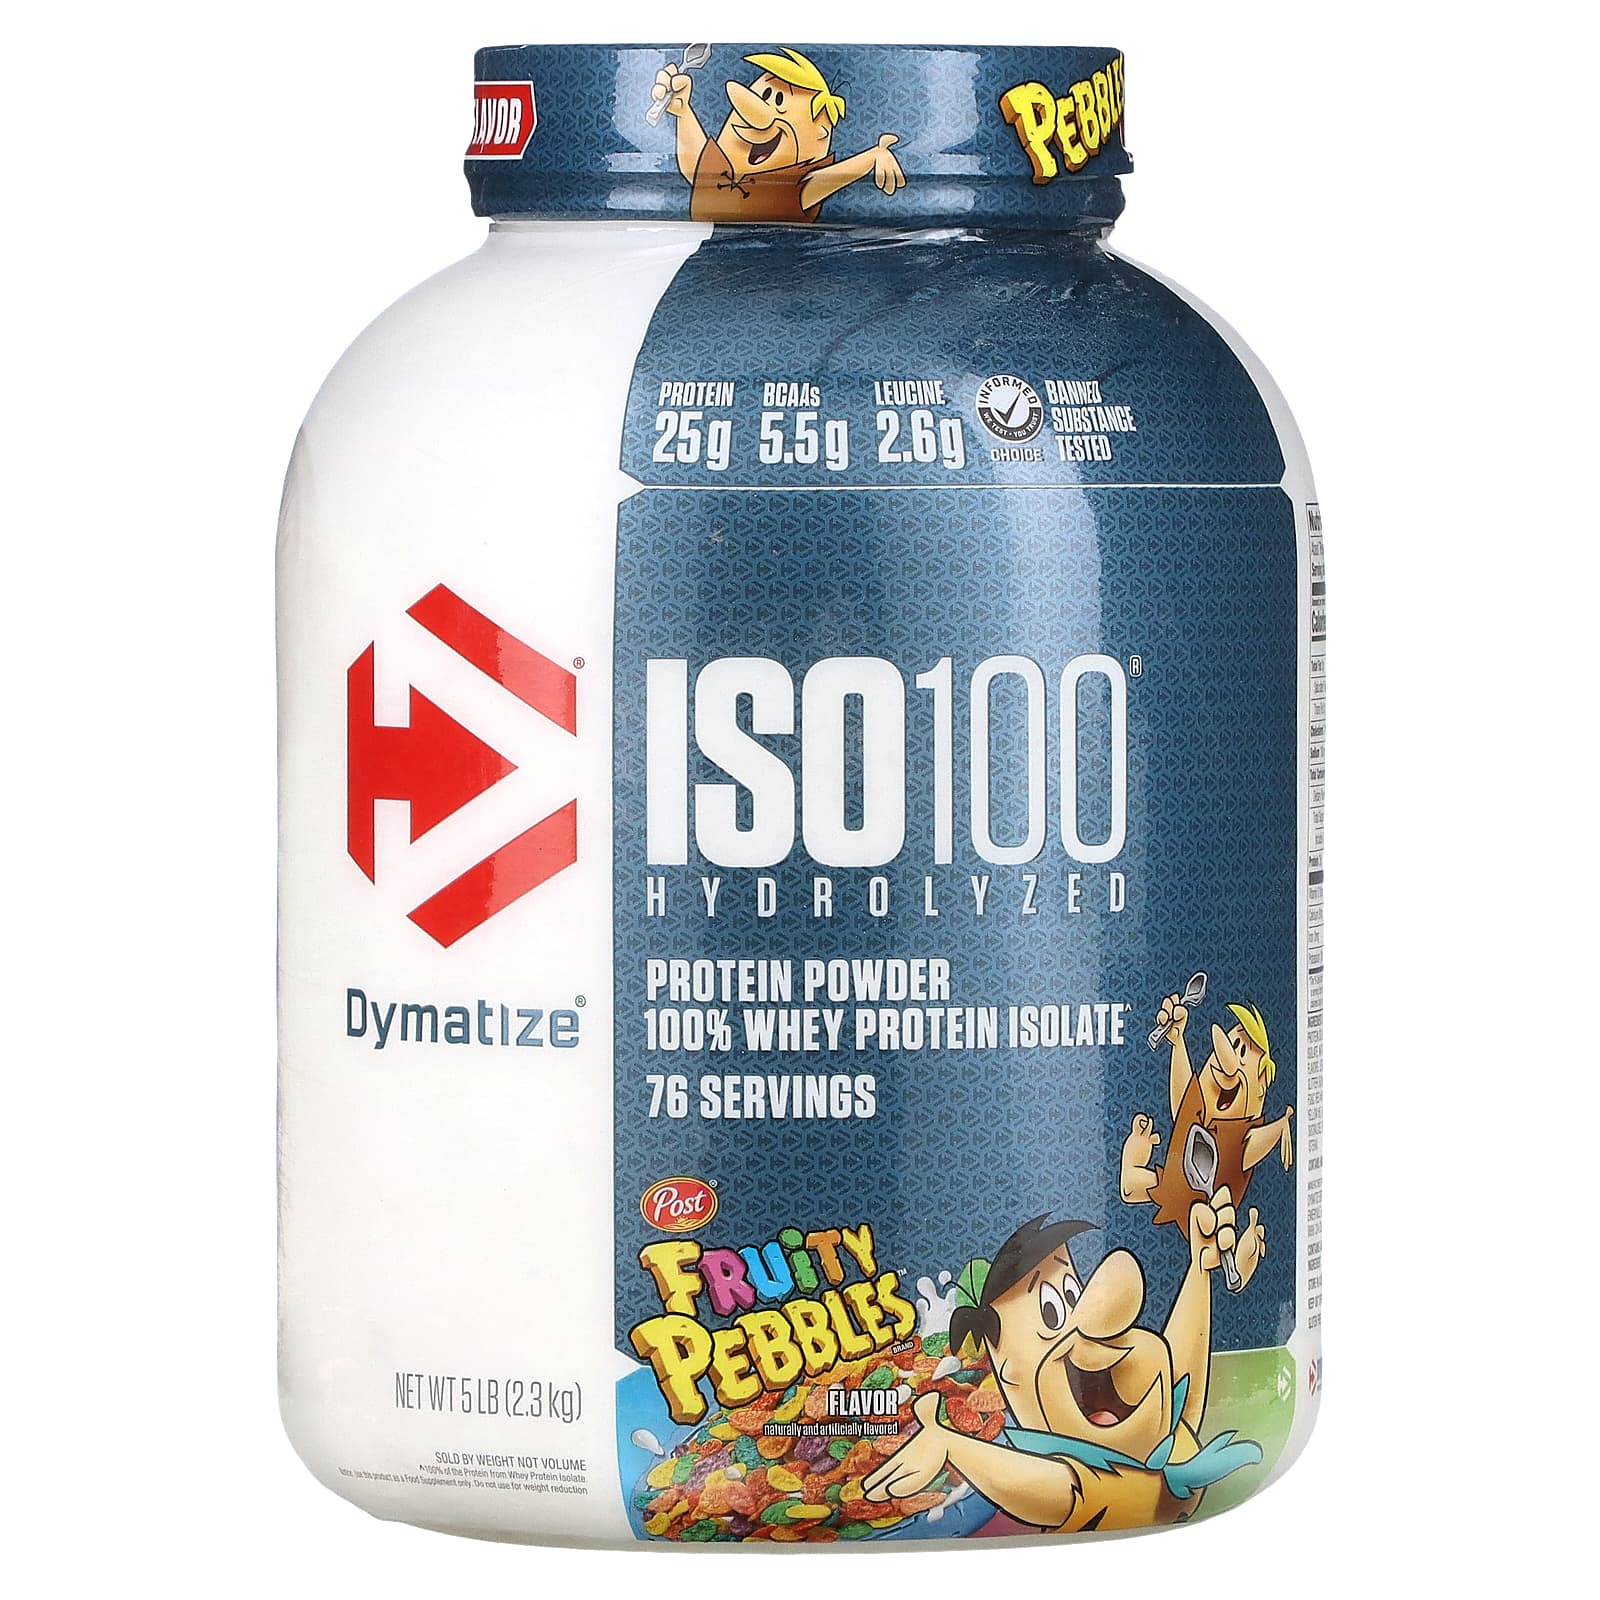 ISO100 Hydrolyzed, 100% Whey Protein Isolate, Fruity Pebbles, 5 lb